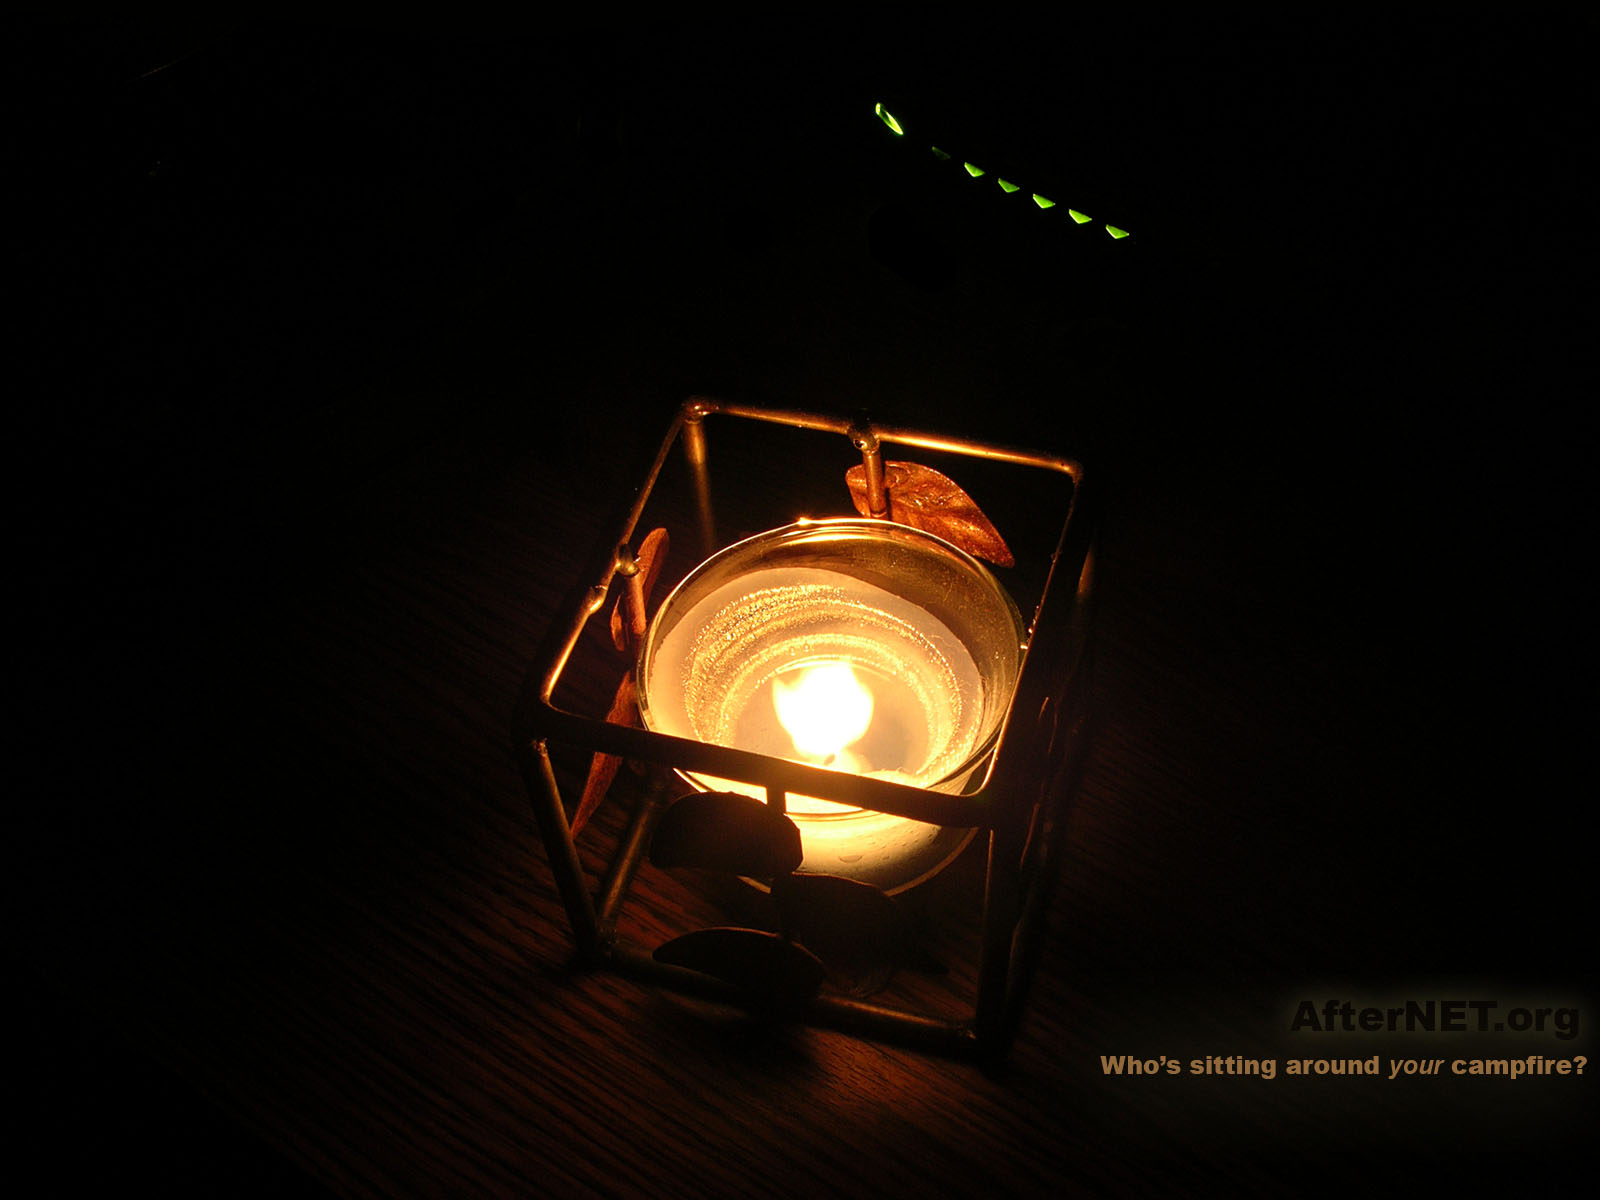 Afternet Candle Wallpaper